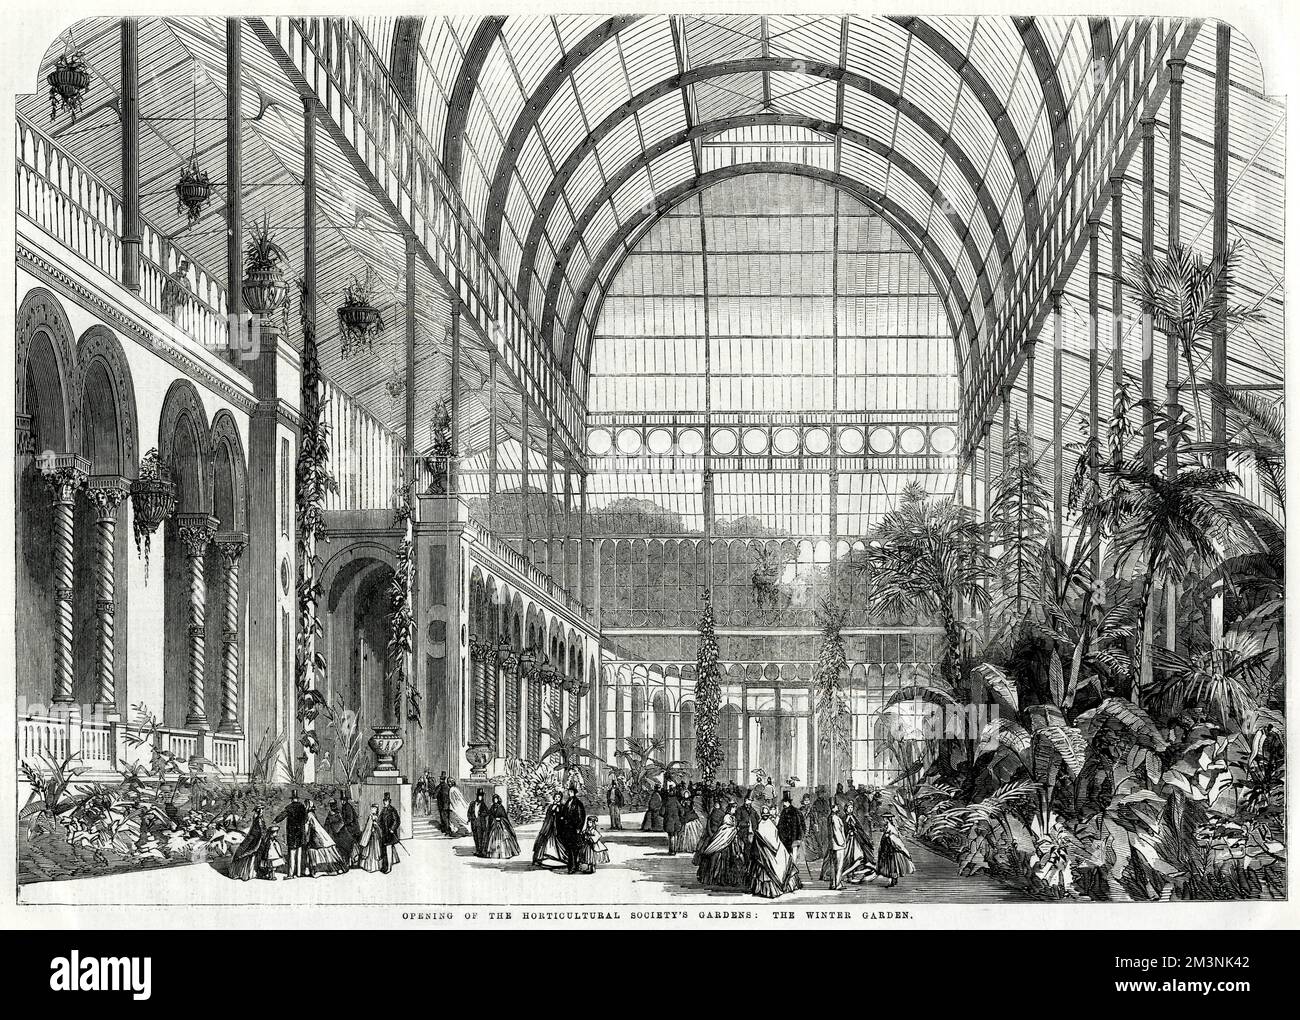 Opening of the Royal Horticultural Society's gardens at South Kensington, London : the winter garden or conservatory. The gardens were opened by Prince Albert, the last public event before his death. This was the first fruit and flower show and were based on land purchased out of the surplus funds of the Great Exhibition, and leased to the RHS. The garden was closed in 1882.  5th June 1861 Stock Photo